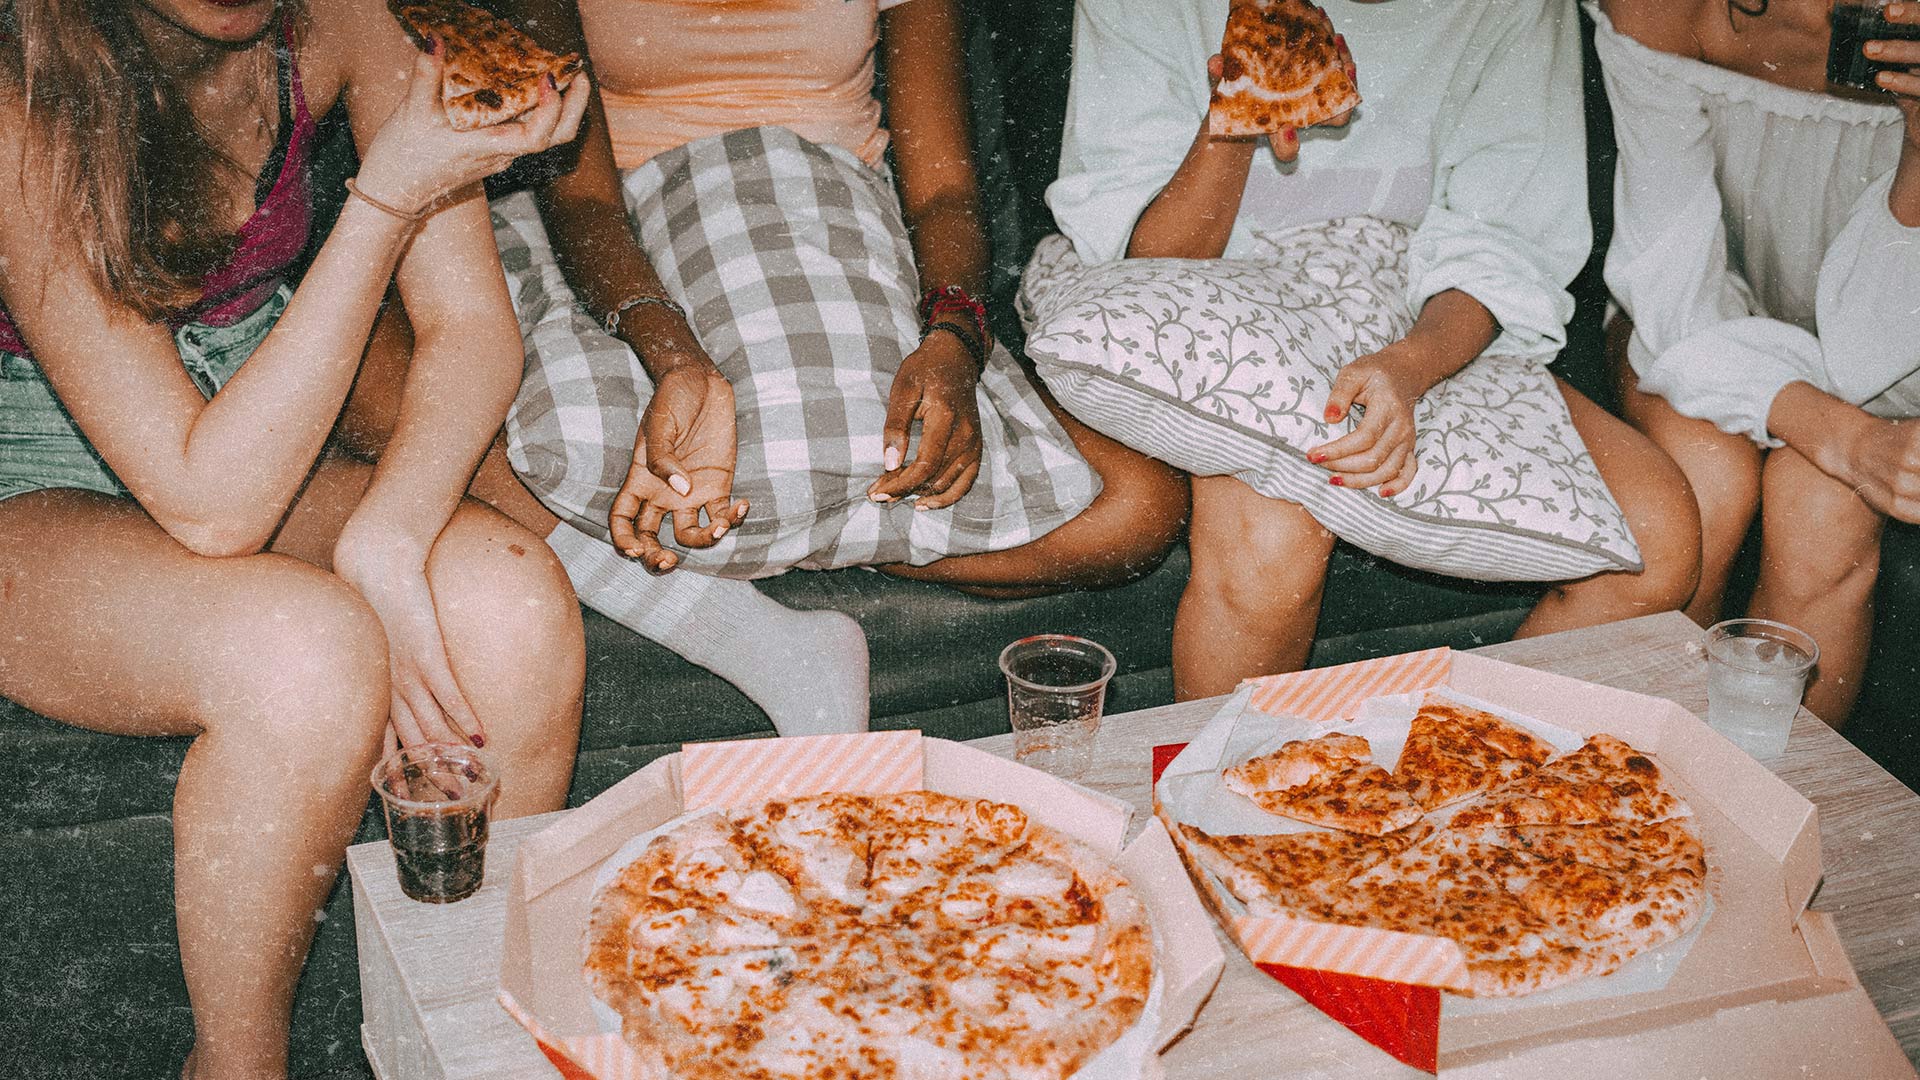 Girls enjoying pizza and soda at a sleepover party.